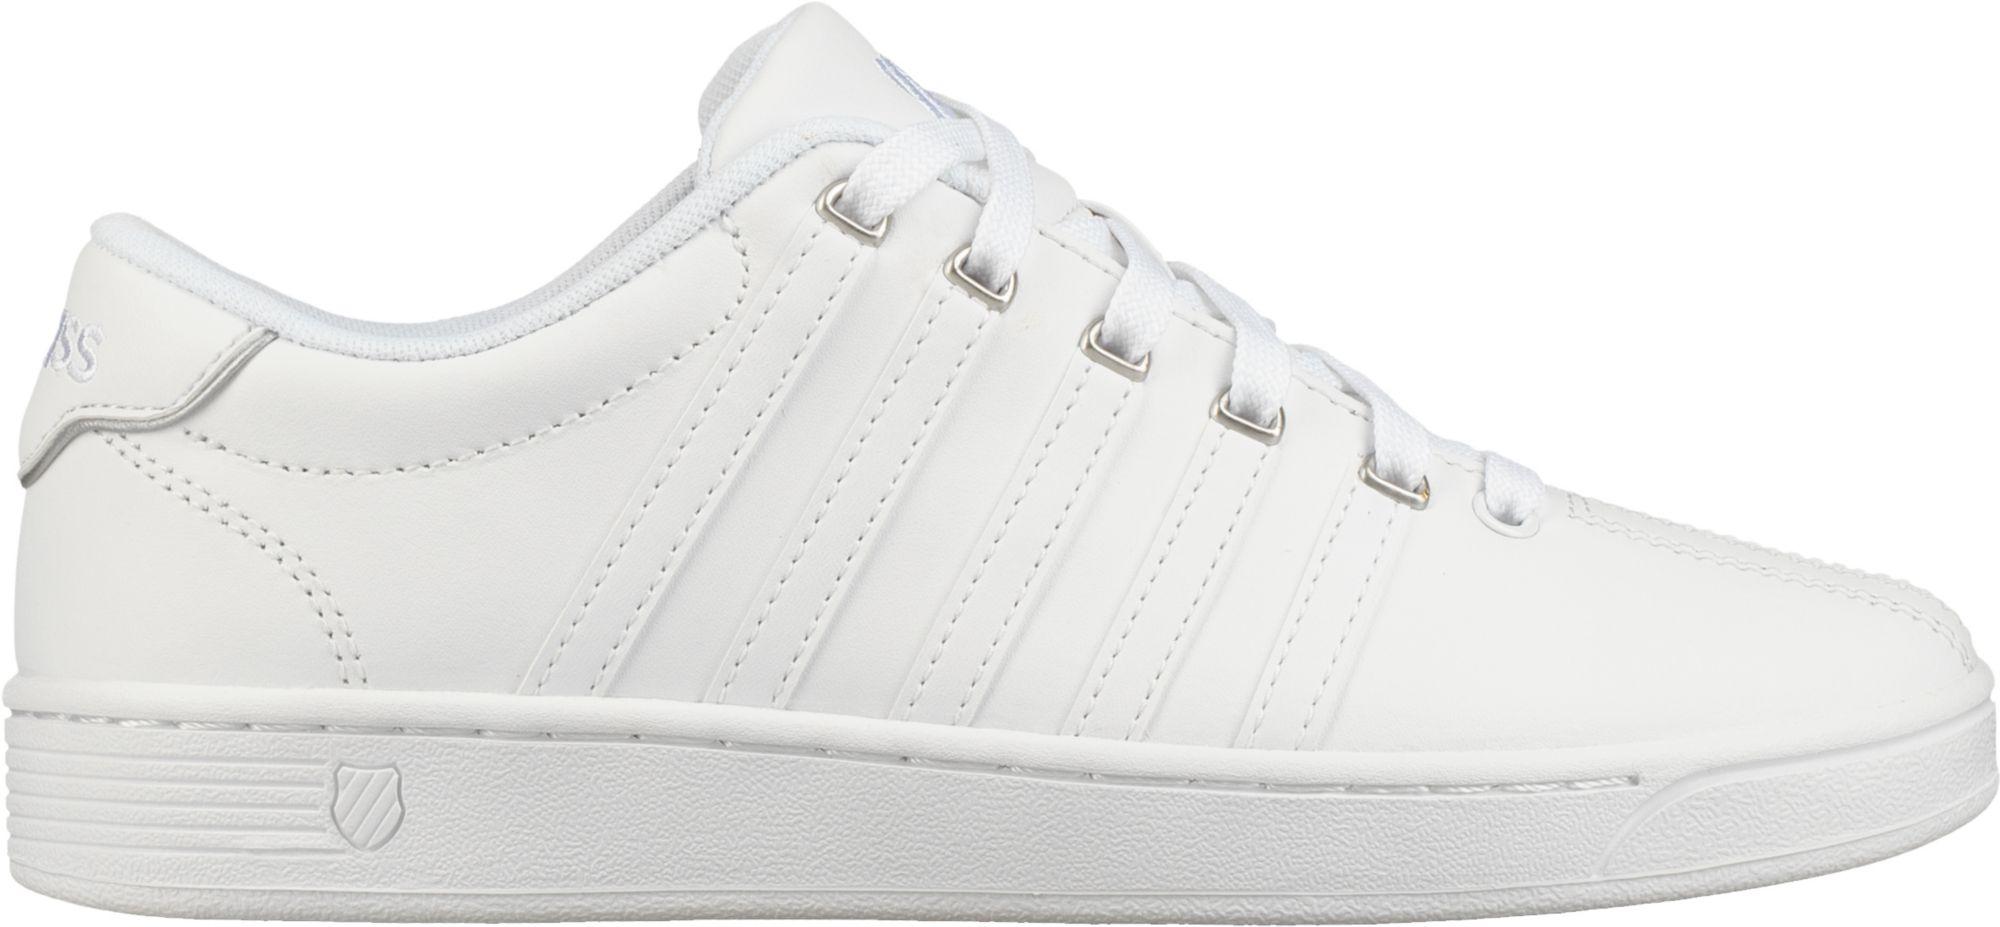 K-swiss Court Pro Ii Shoes in White/Silver (White) for Men - Lyst